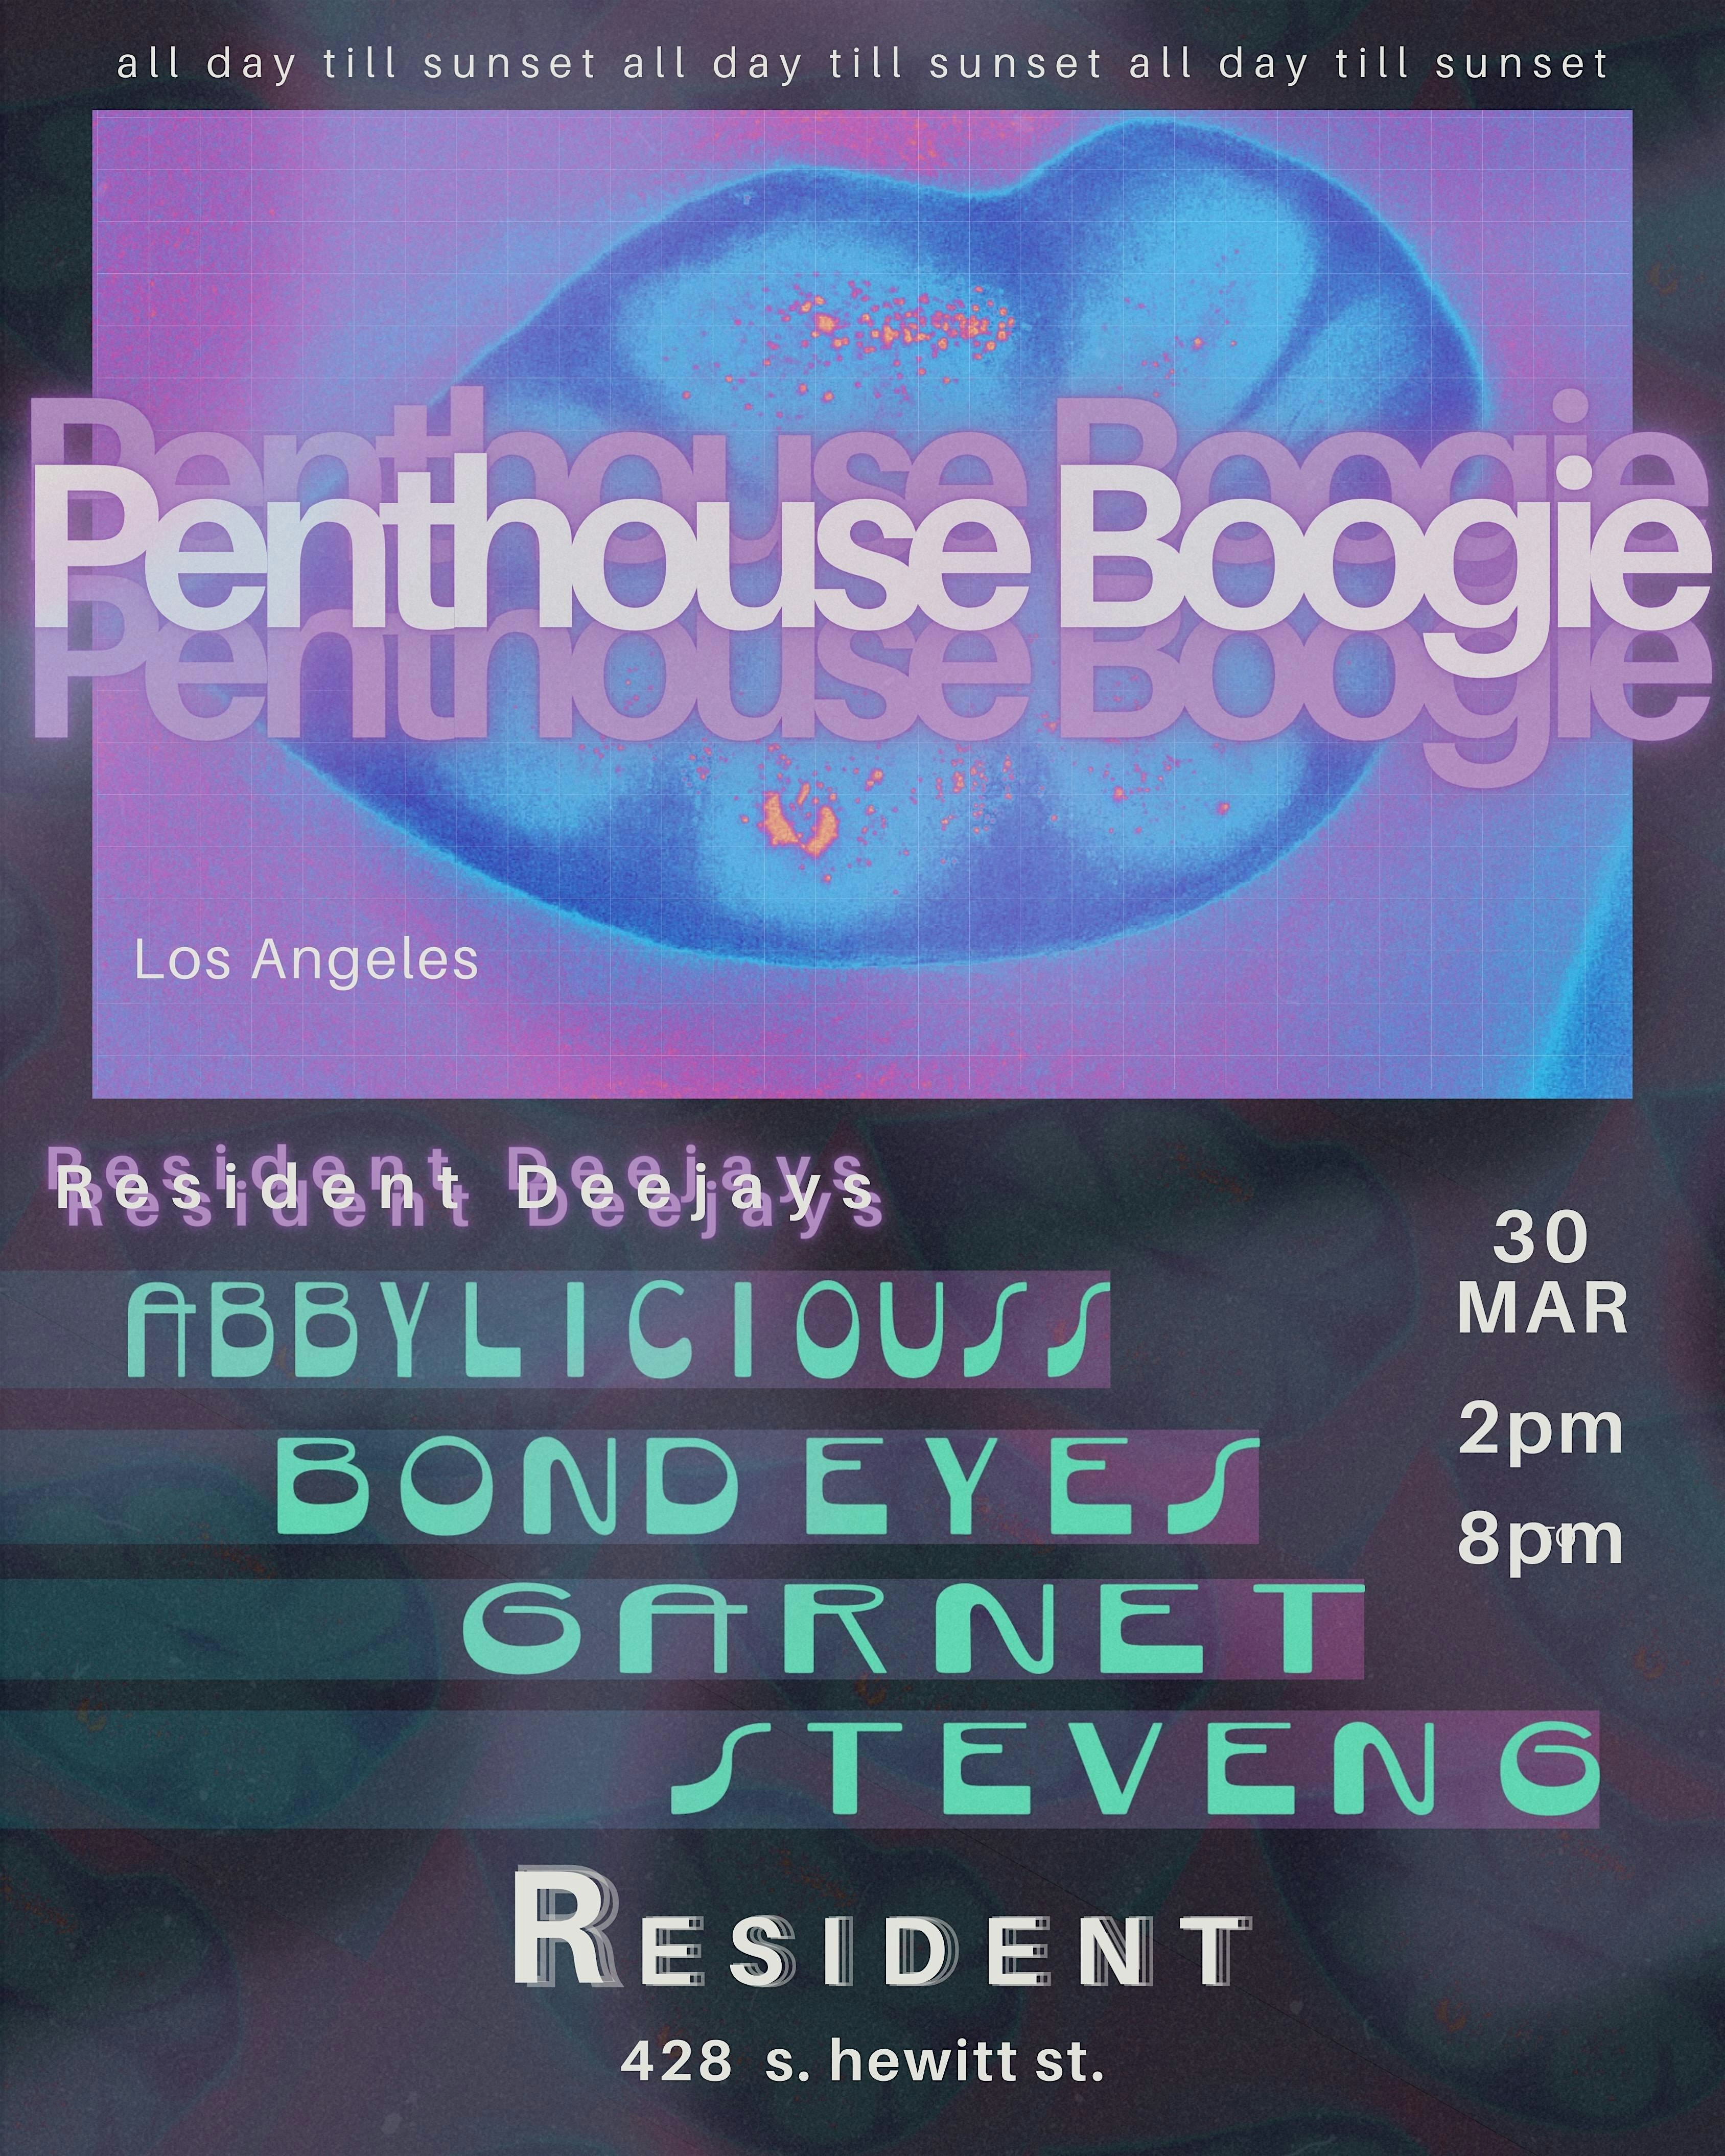 On the Patio: Penthouse Boogie